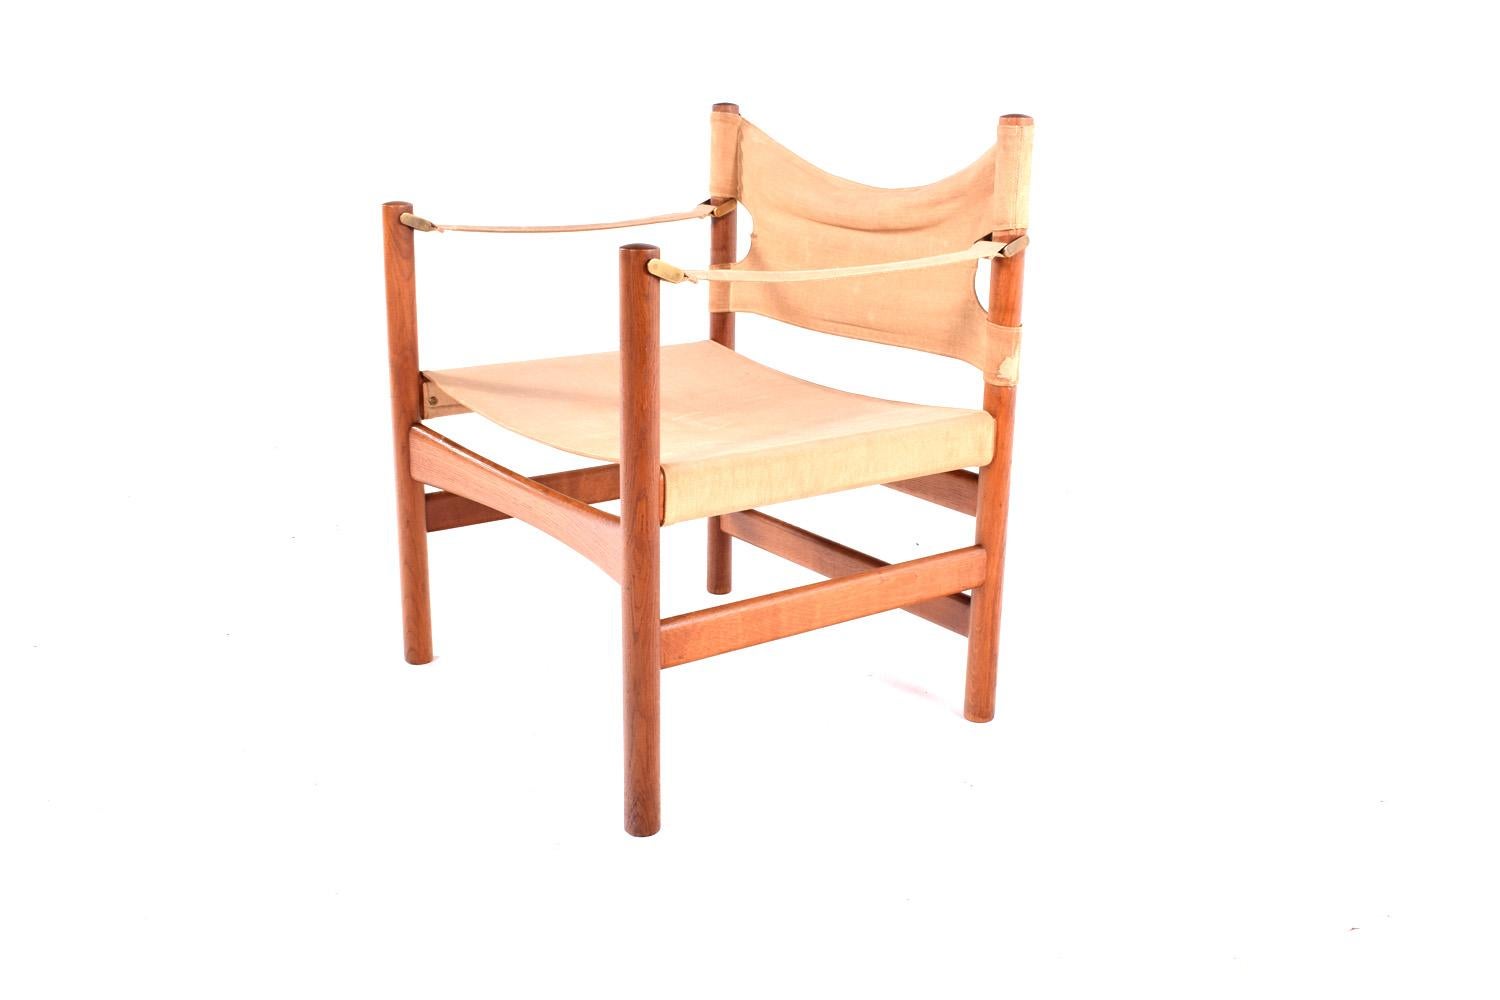 Very beautiful Safari chair, model #2221 in solid oak and brass with original slung cotton canvas seat designed by Borge Mogensen for Fredericia, Denmark. Rare chair with high quality.